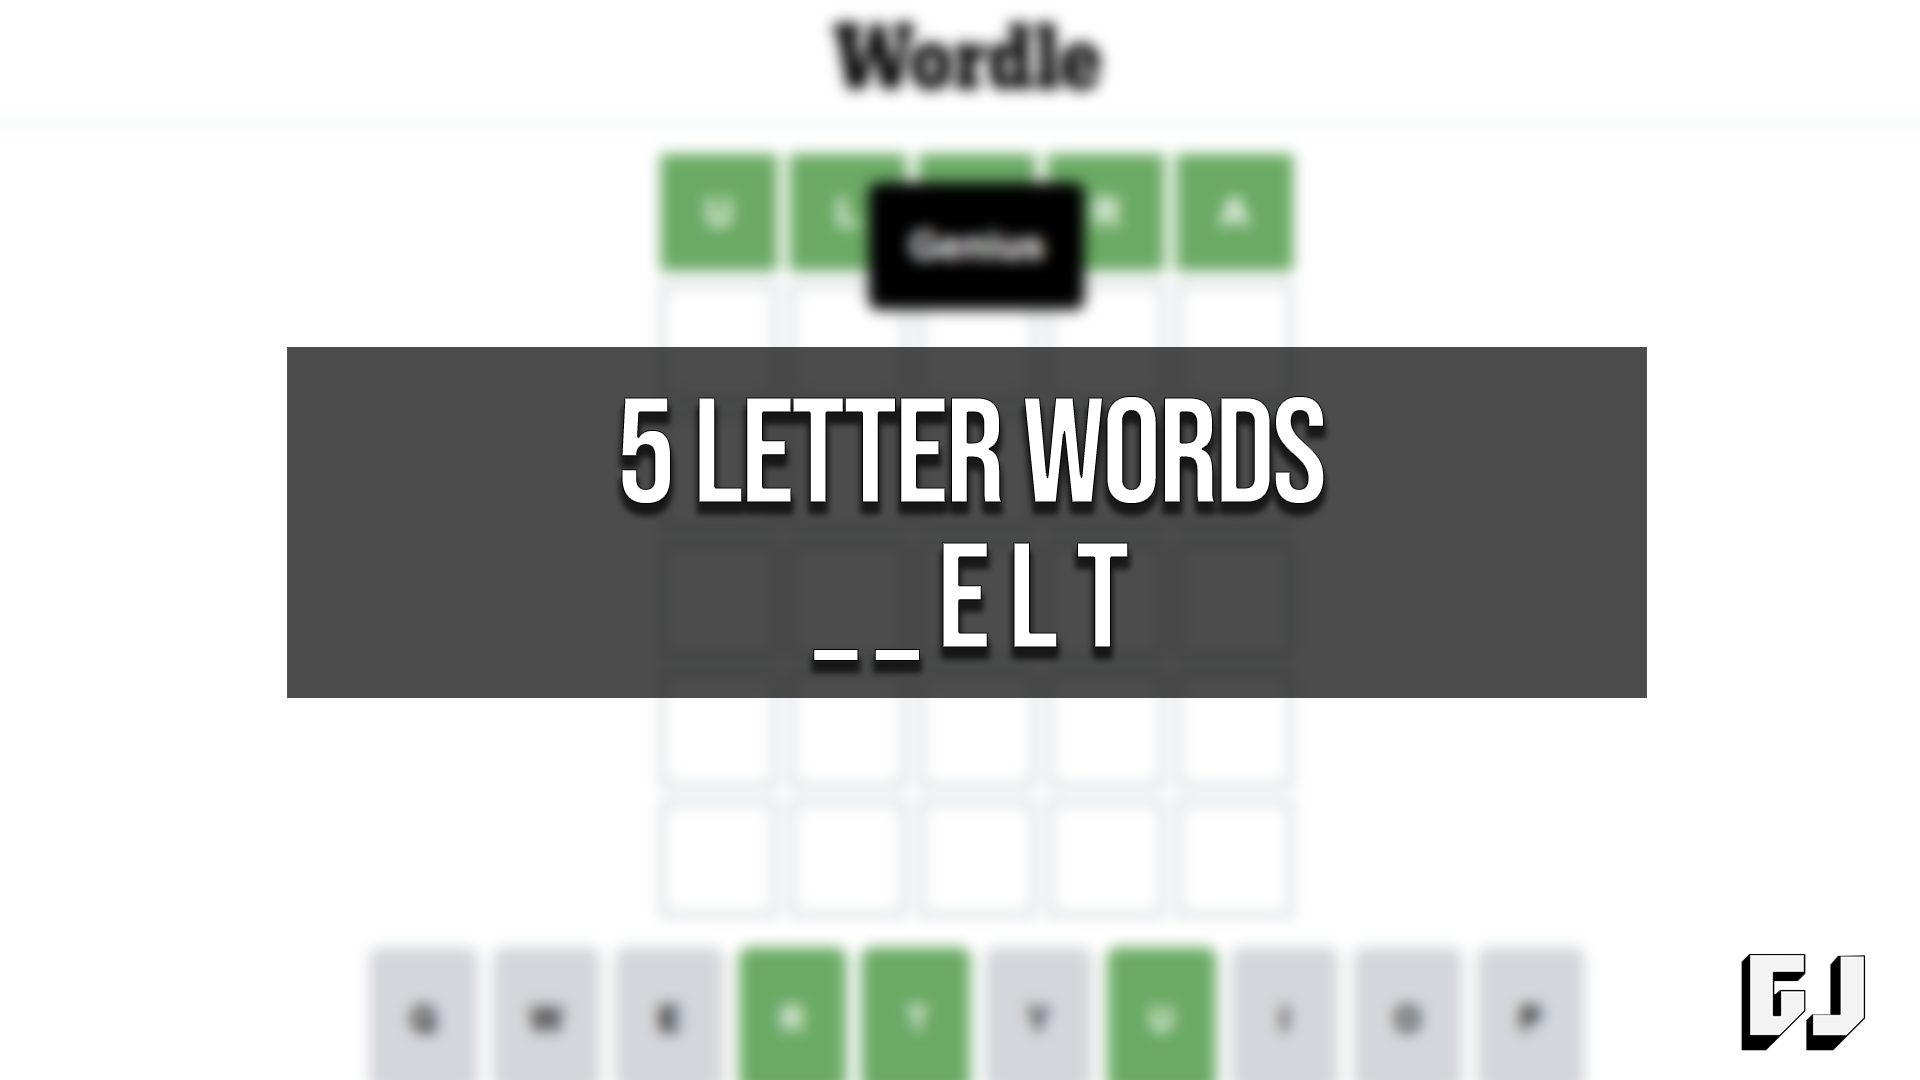 5 letter words containing elt